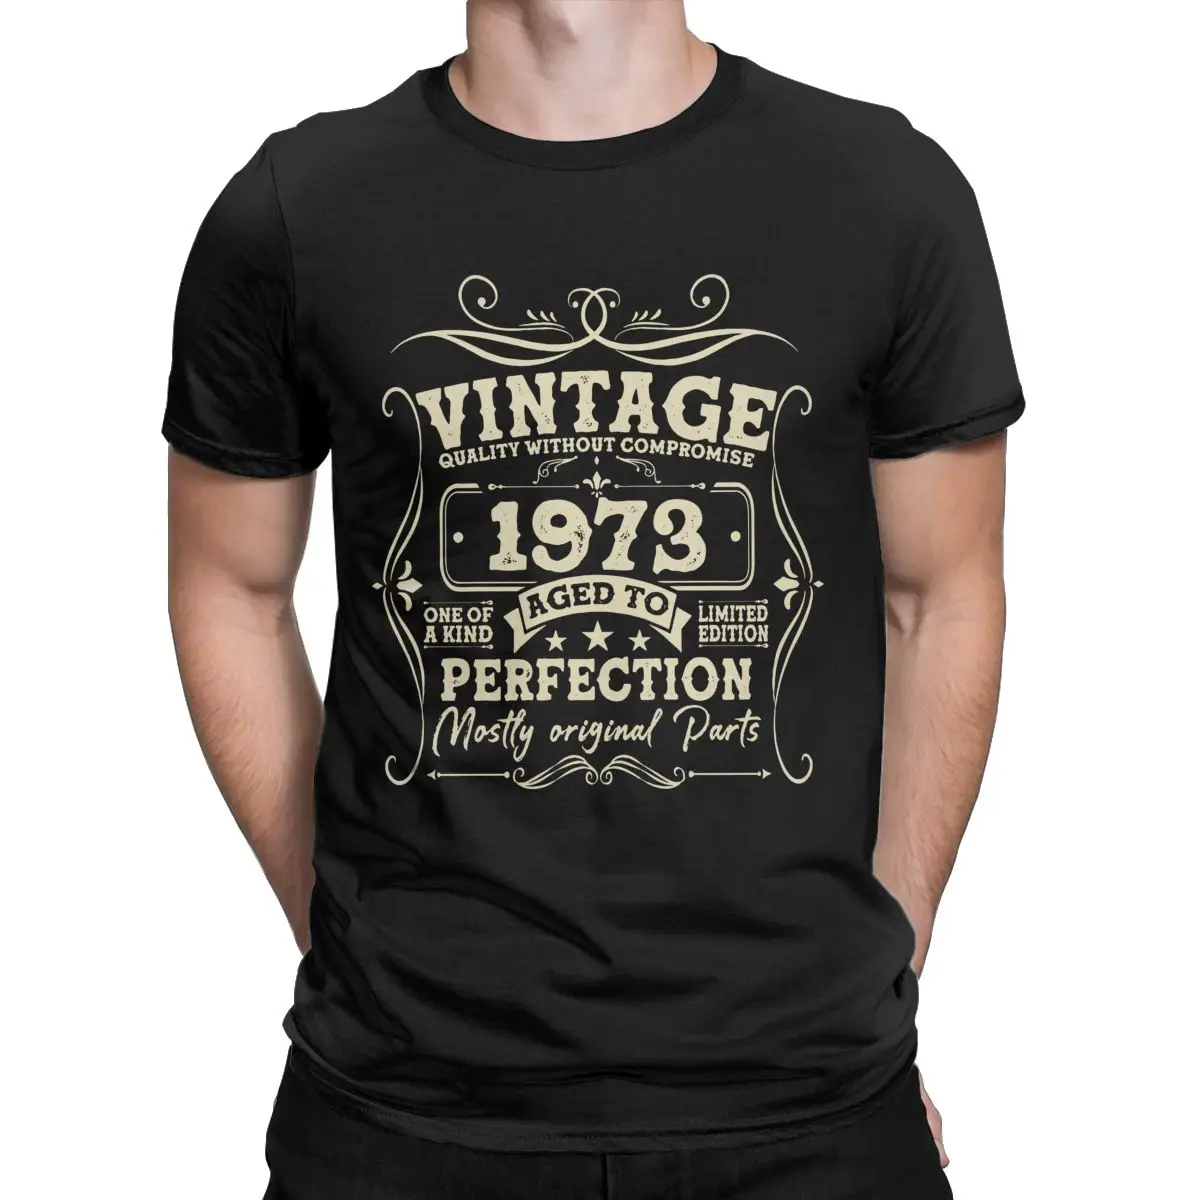 

Vintage 1973 Aged To Perfection 50th Birthday Gift t shirt for men Cotton Tee Round Collar Short Sleeve T Shirts Plus Size Tops